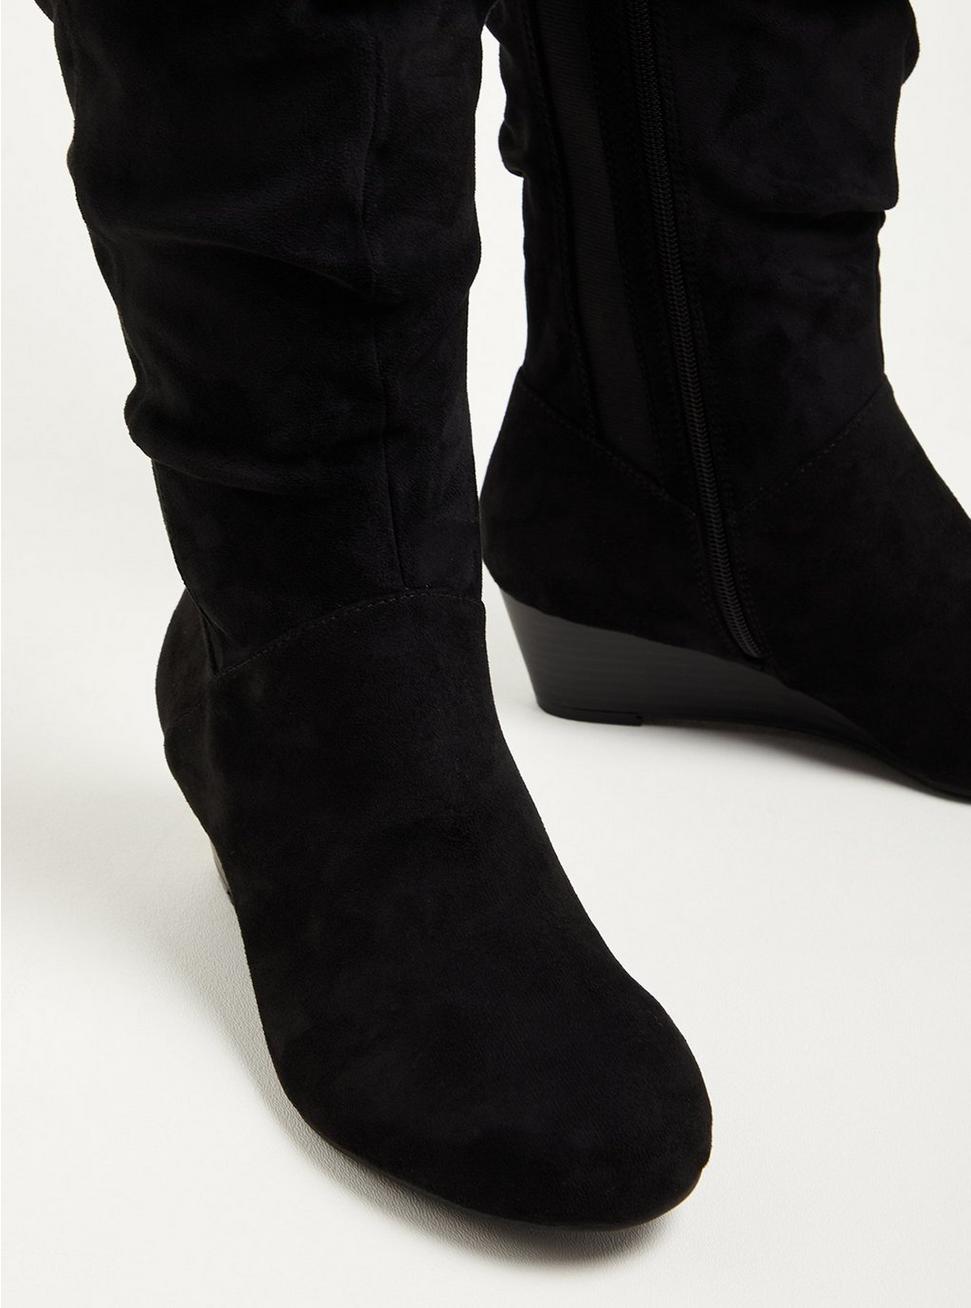 Ruched Wedge Over The Knee Boot - Faux Suede Black (WW), BLACK, alternate